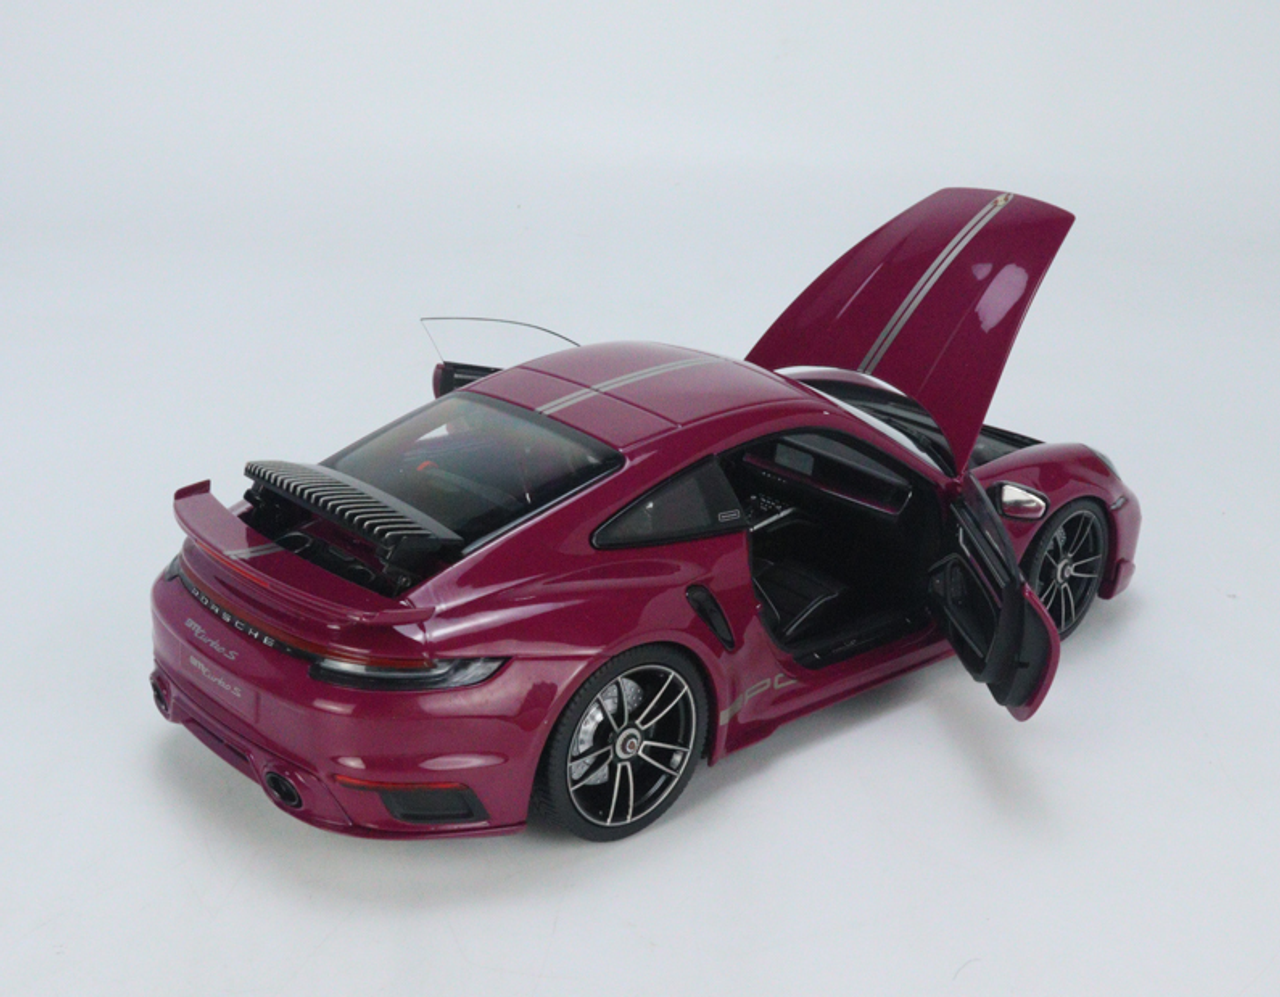 1/18 Minichamps 2021 Porsche 911 (992) Turbo S Coupe Sport Design 20th Anniversary Edition (Red) Full Open Diecast Car Model Limited 500 Pieces